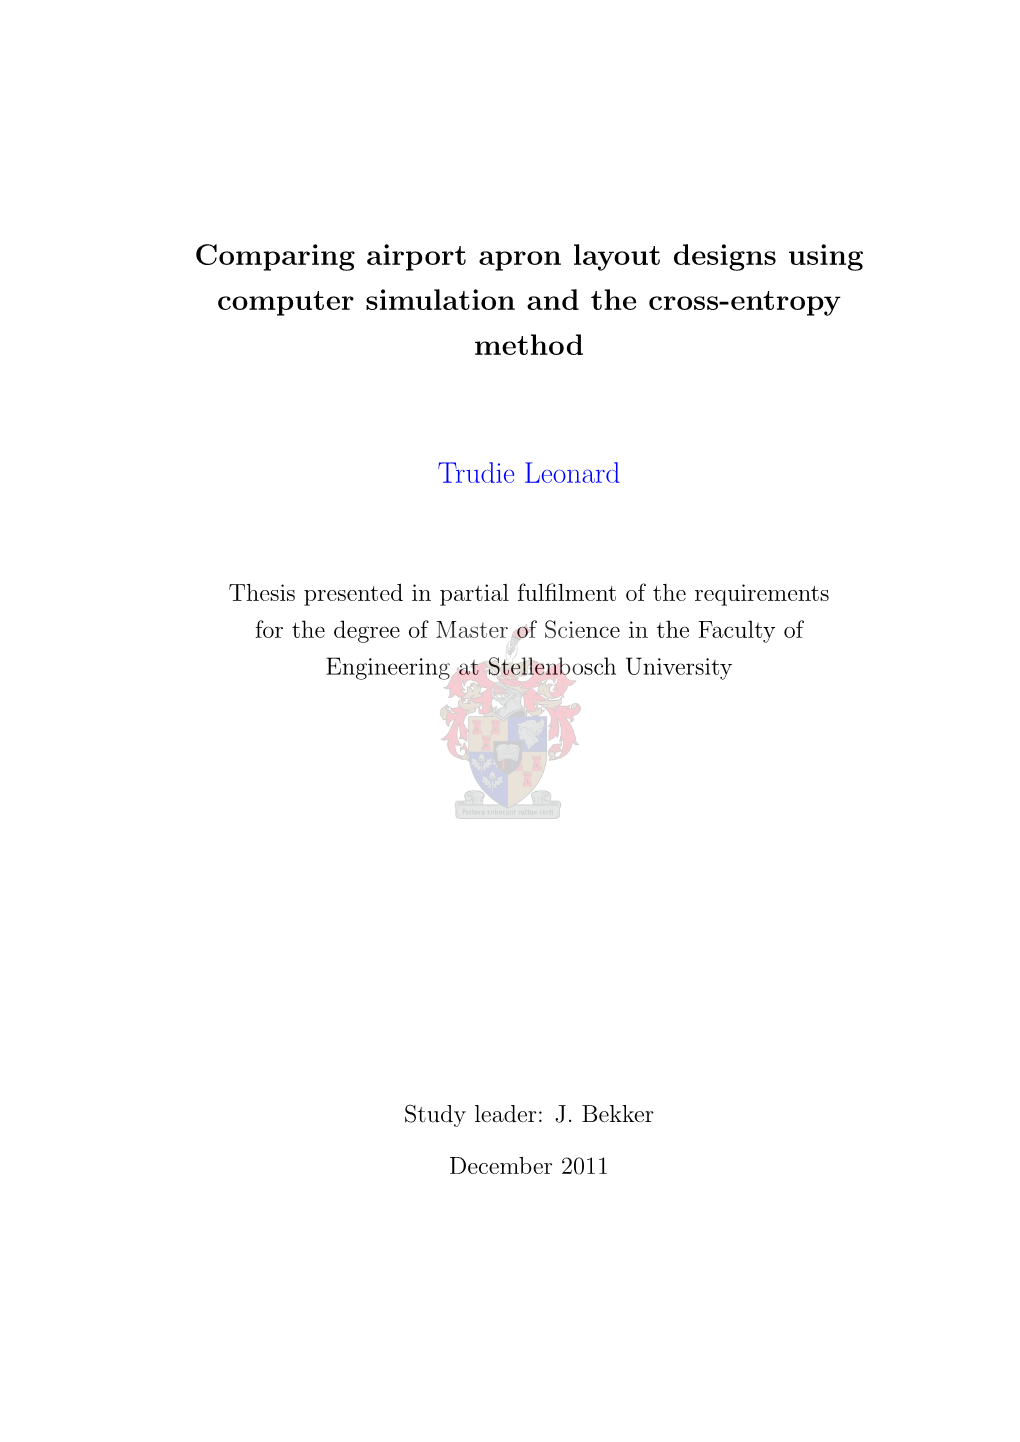 Comparing Airport Apron Layout Designs Using Computer Simulation and the Cross-Entropy Method